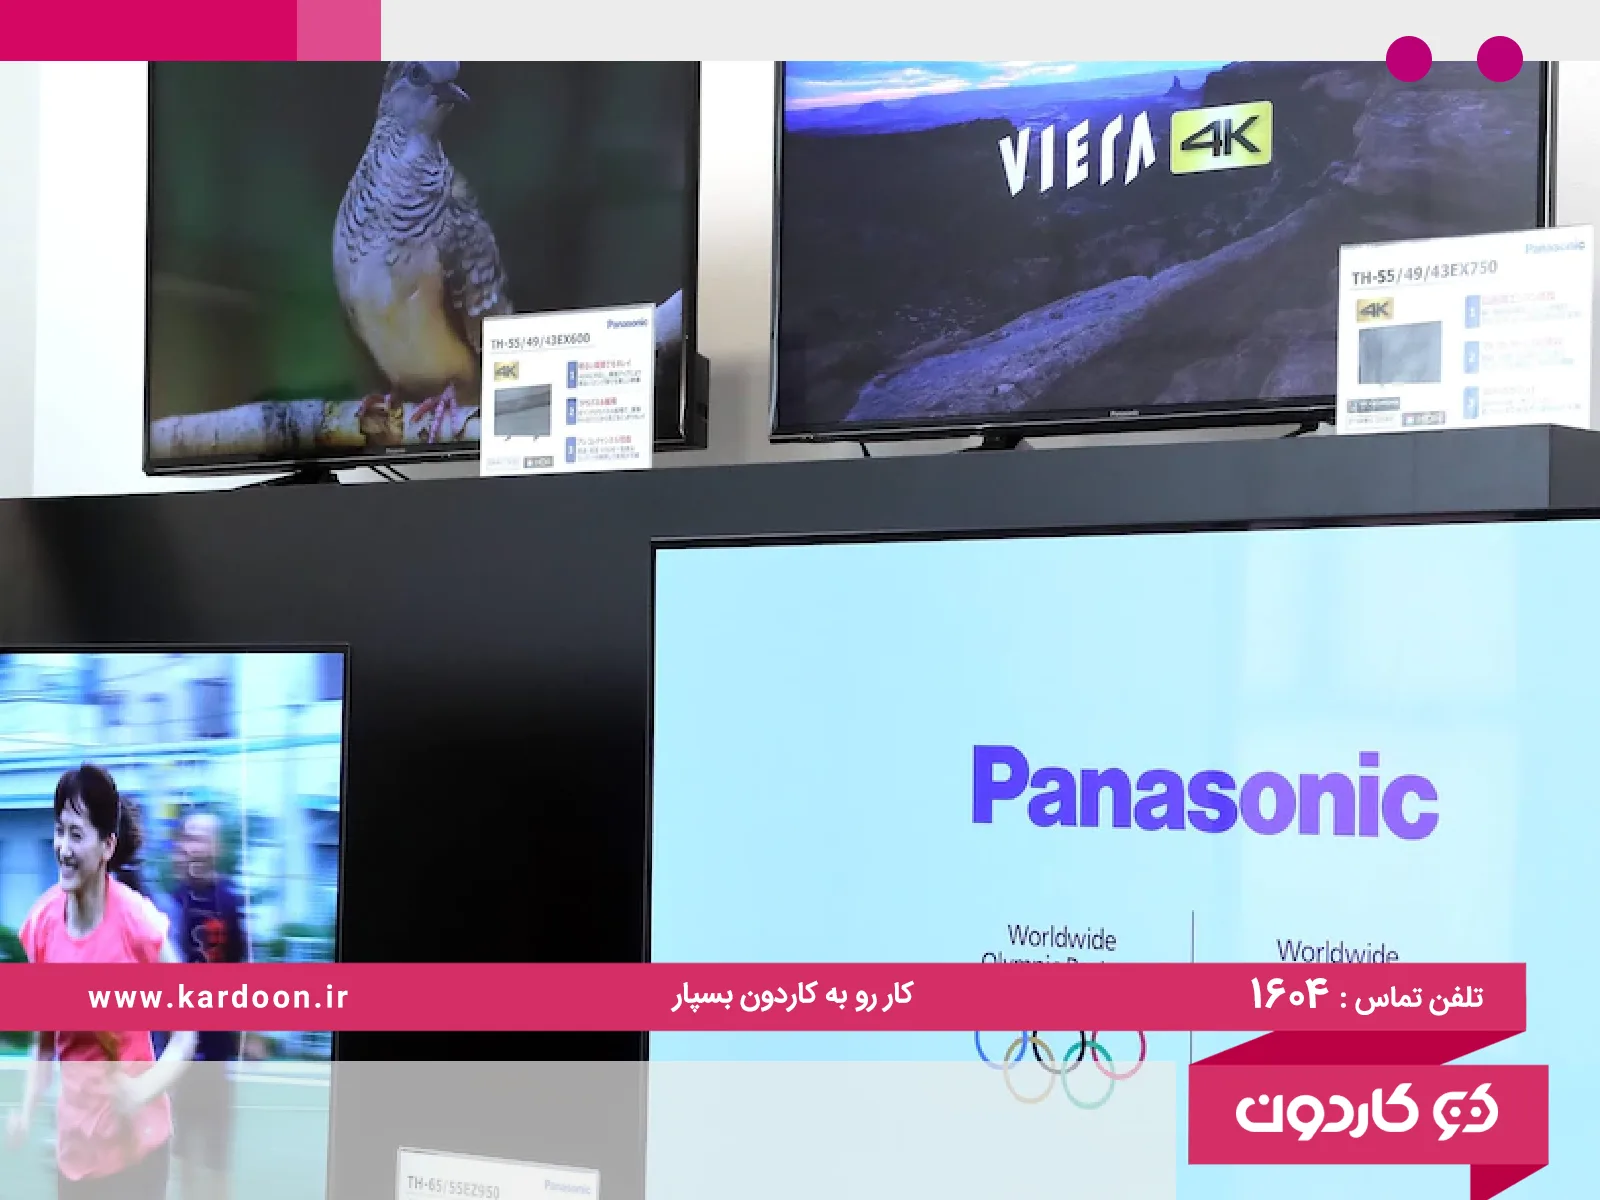 How to find Panasonic TV channels manually and automatically